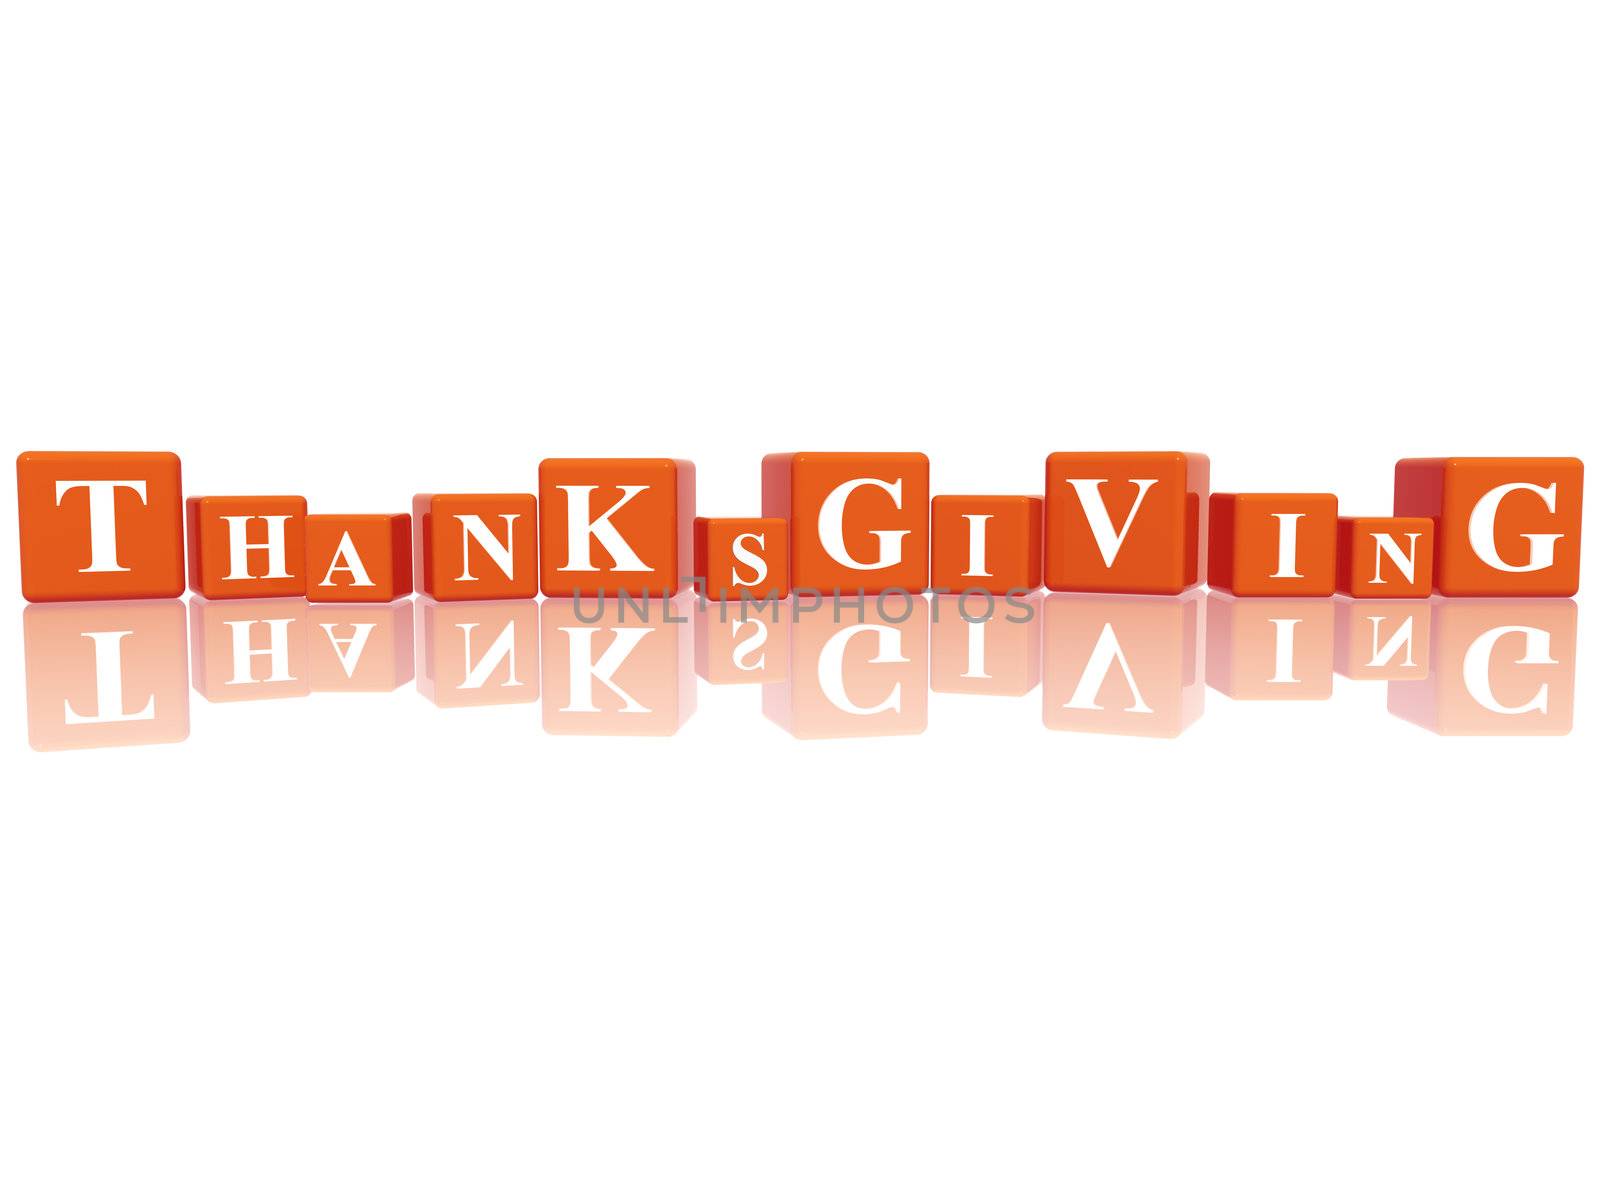 Thanksgiving in 3d cubes by marinini